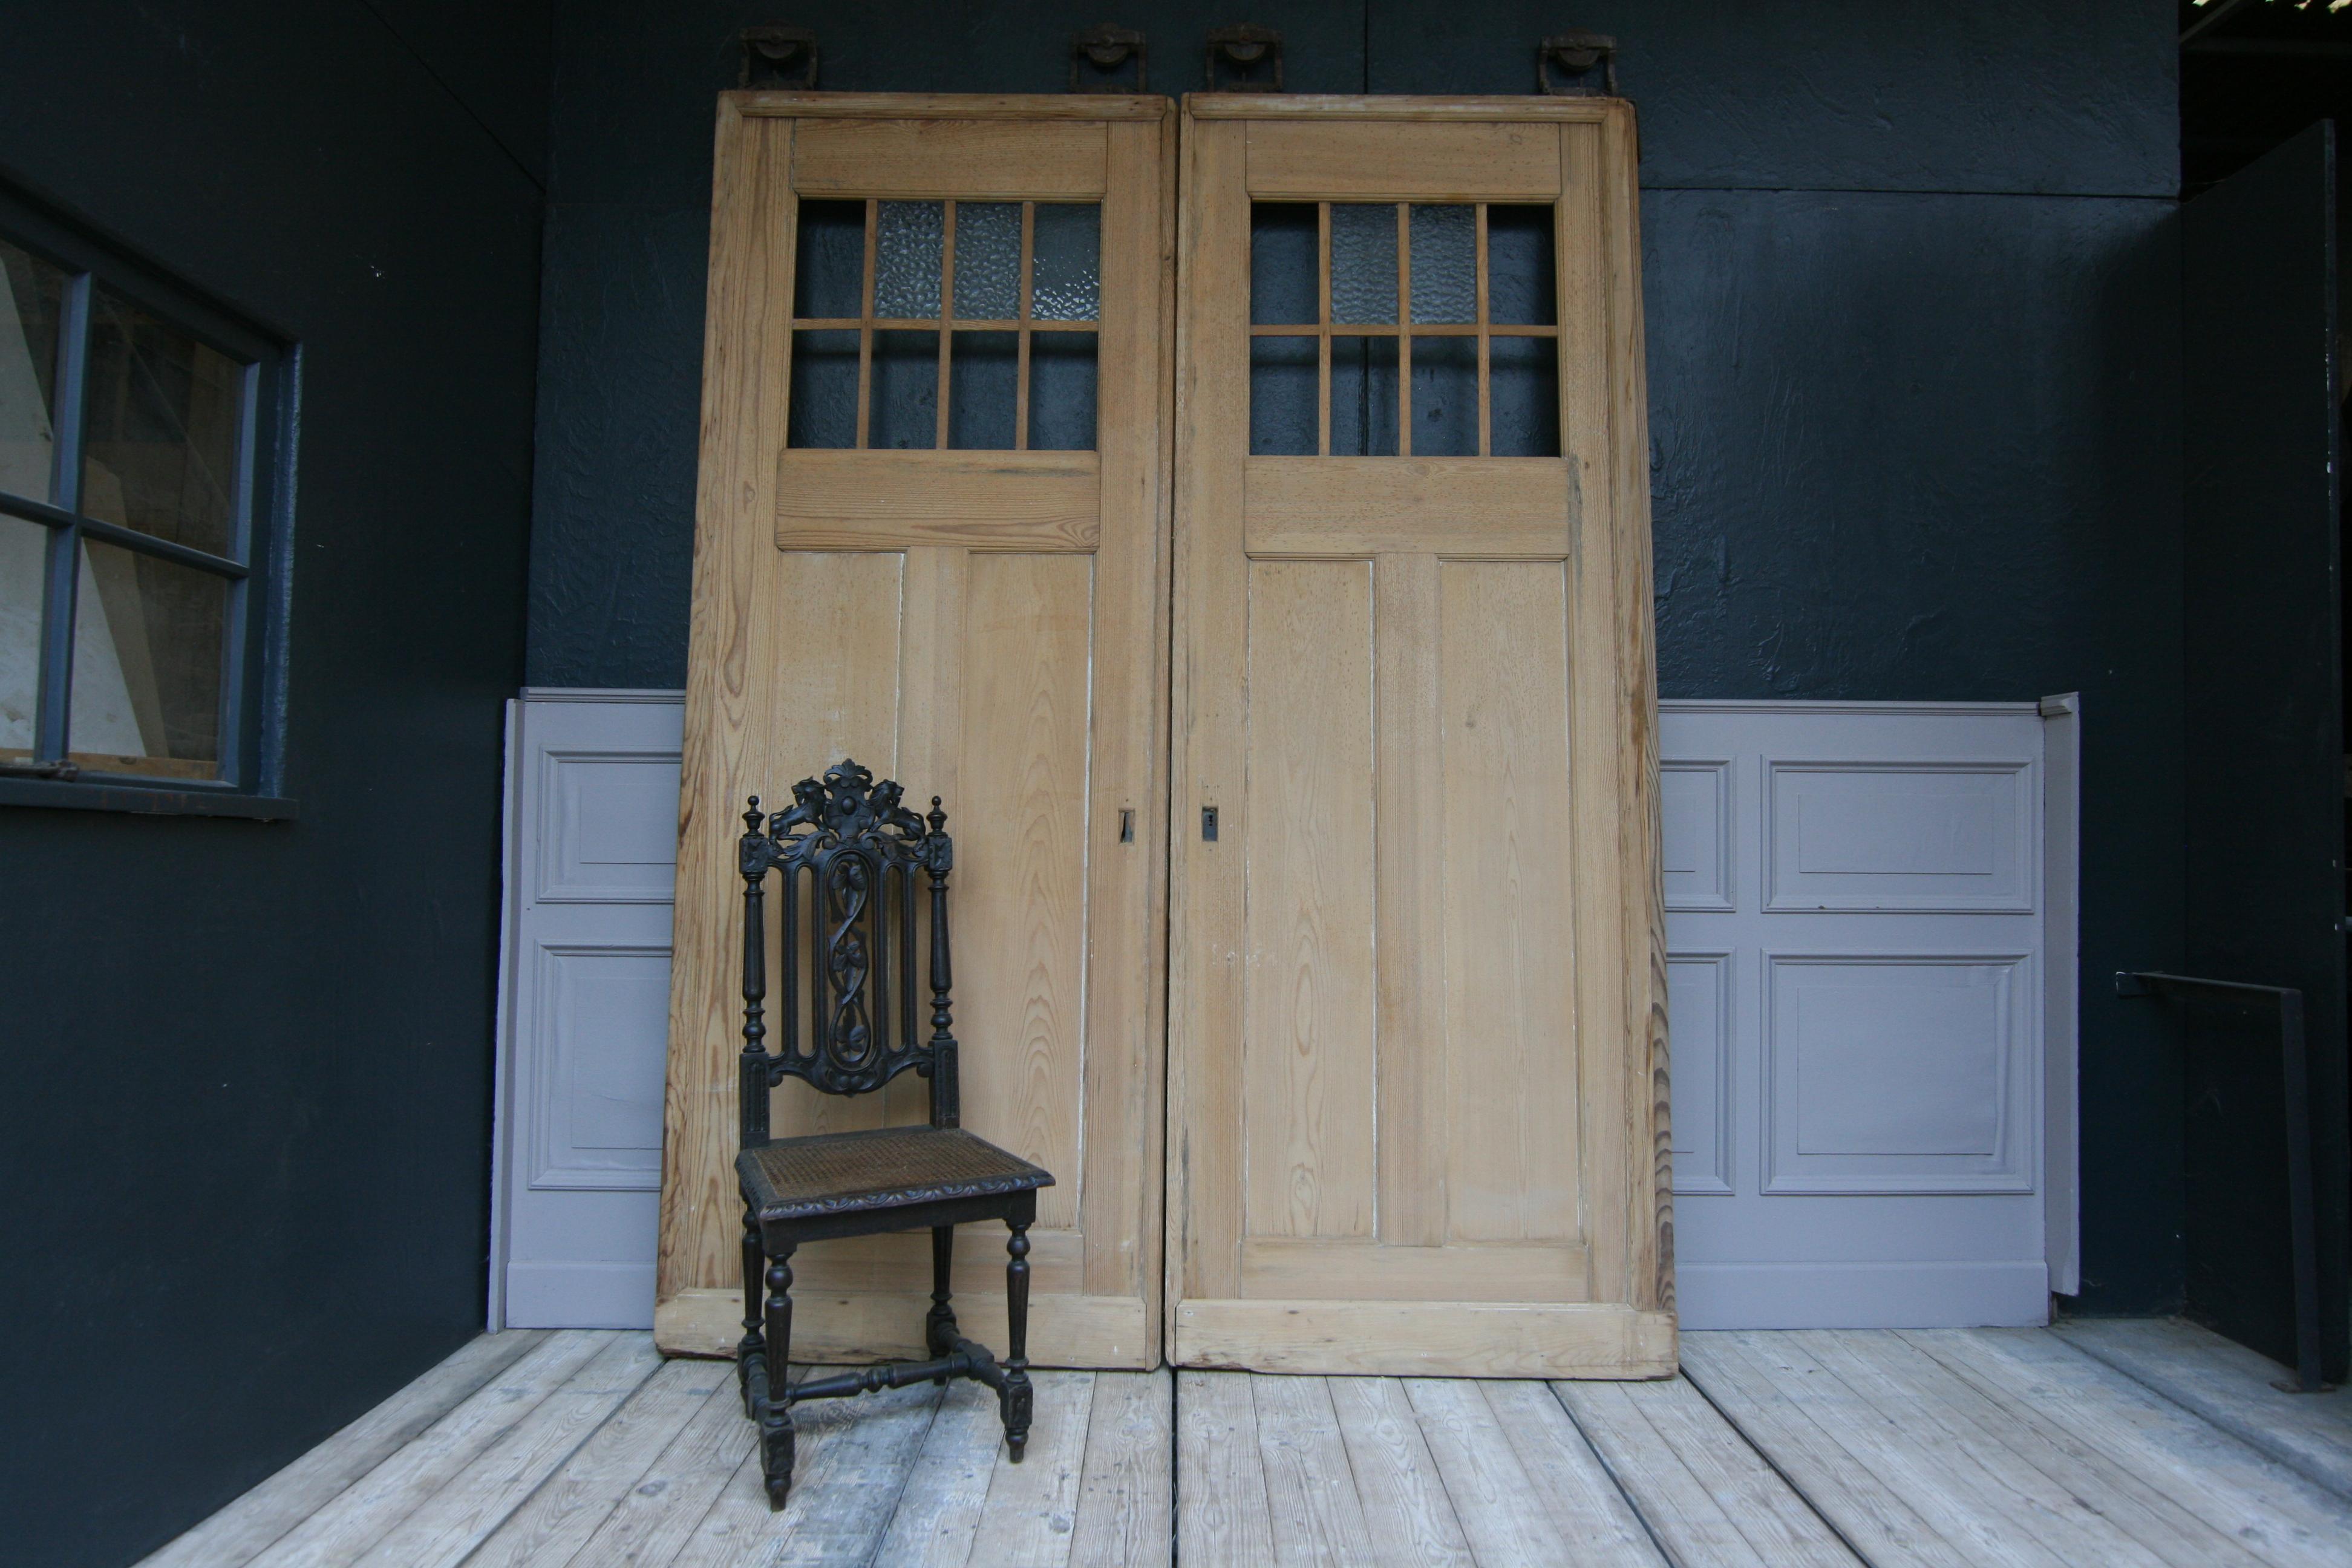 A pair of large early 20th century German doors made of pine.
Each door has the original bracket or rollers mounted on top with which they could originally be used as sliding doors.
The pine wood is leached, so the doors can now be refurbished as